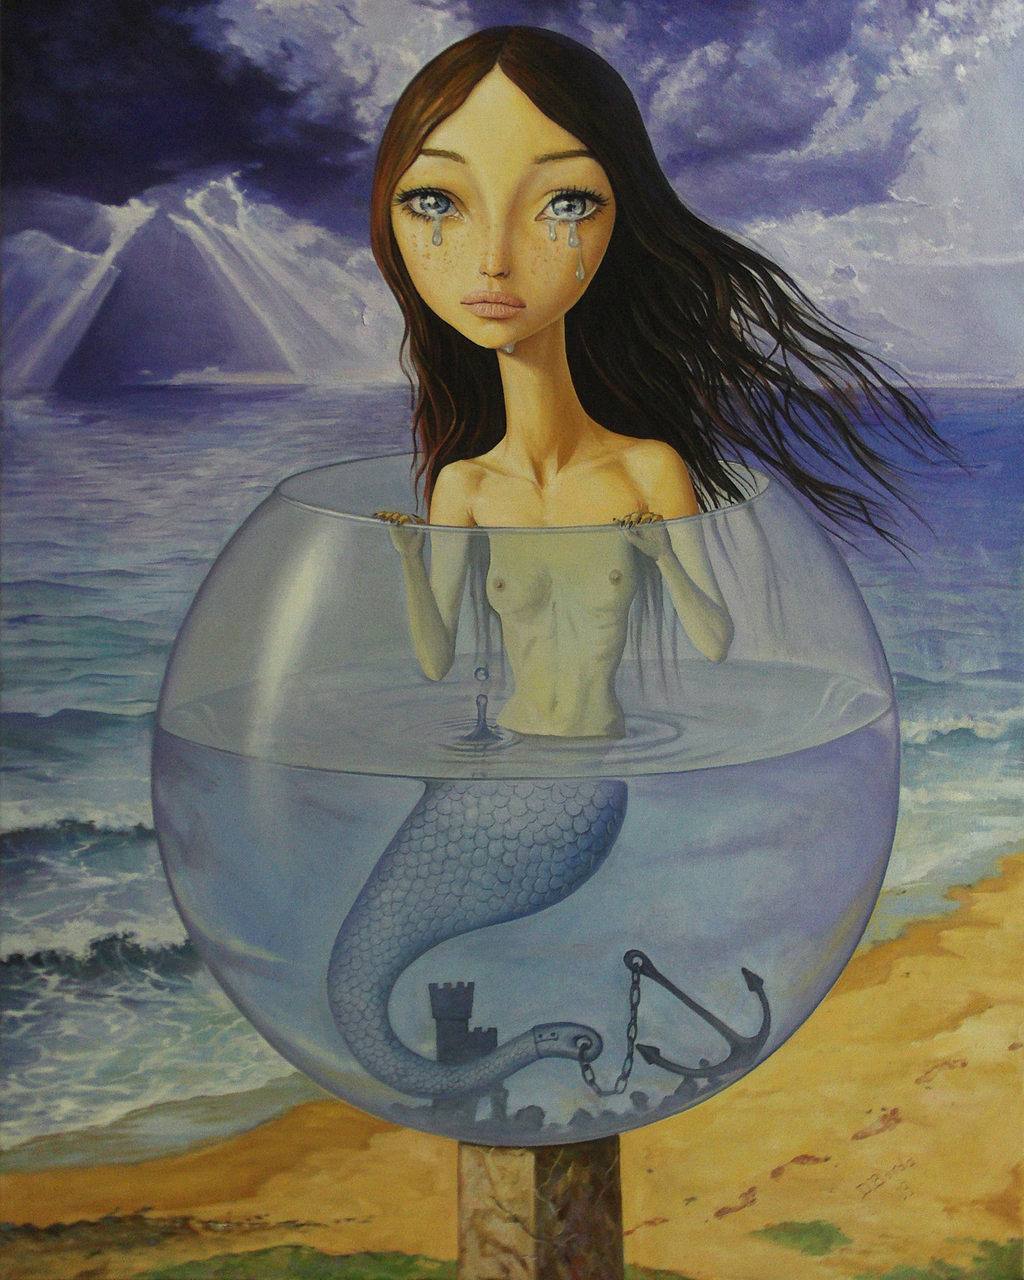 Mesmerizing And Thought Provoking Surreal Paintings By Adrian Borda (3)